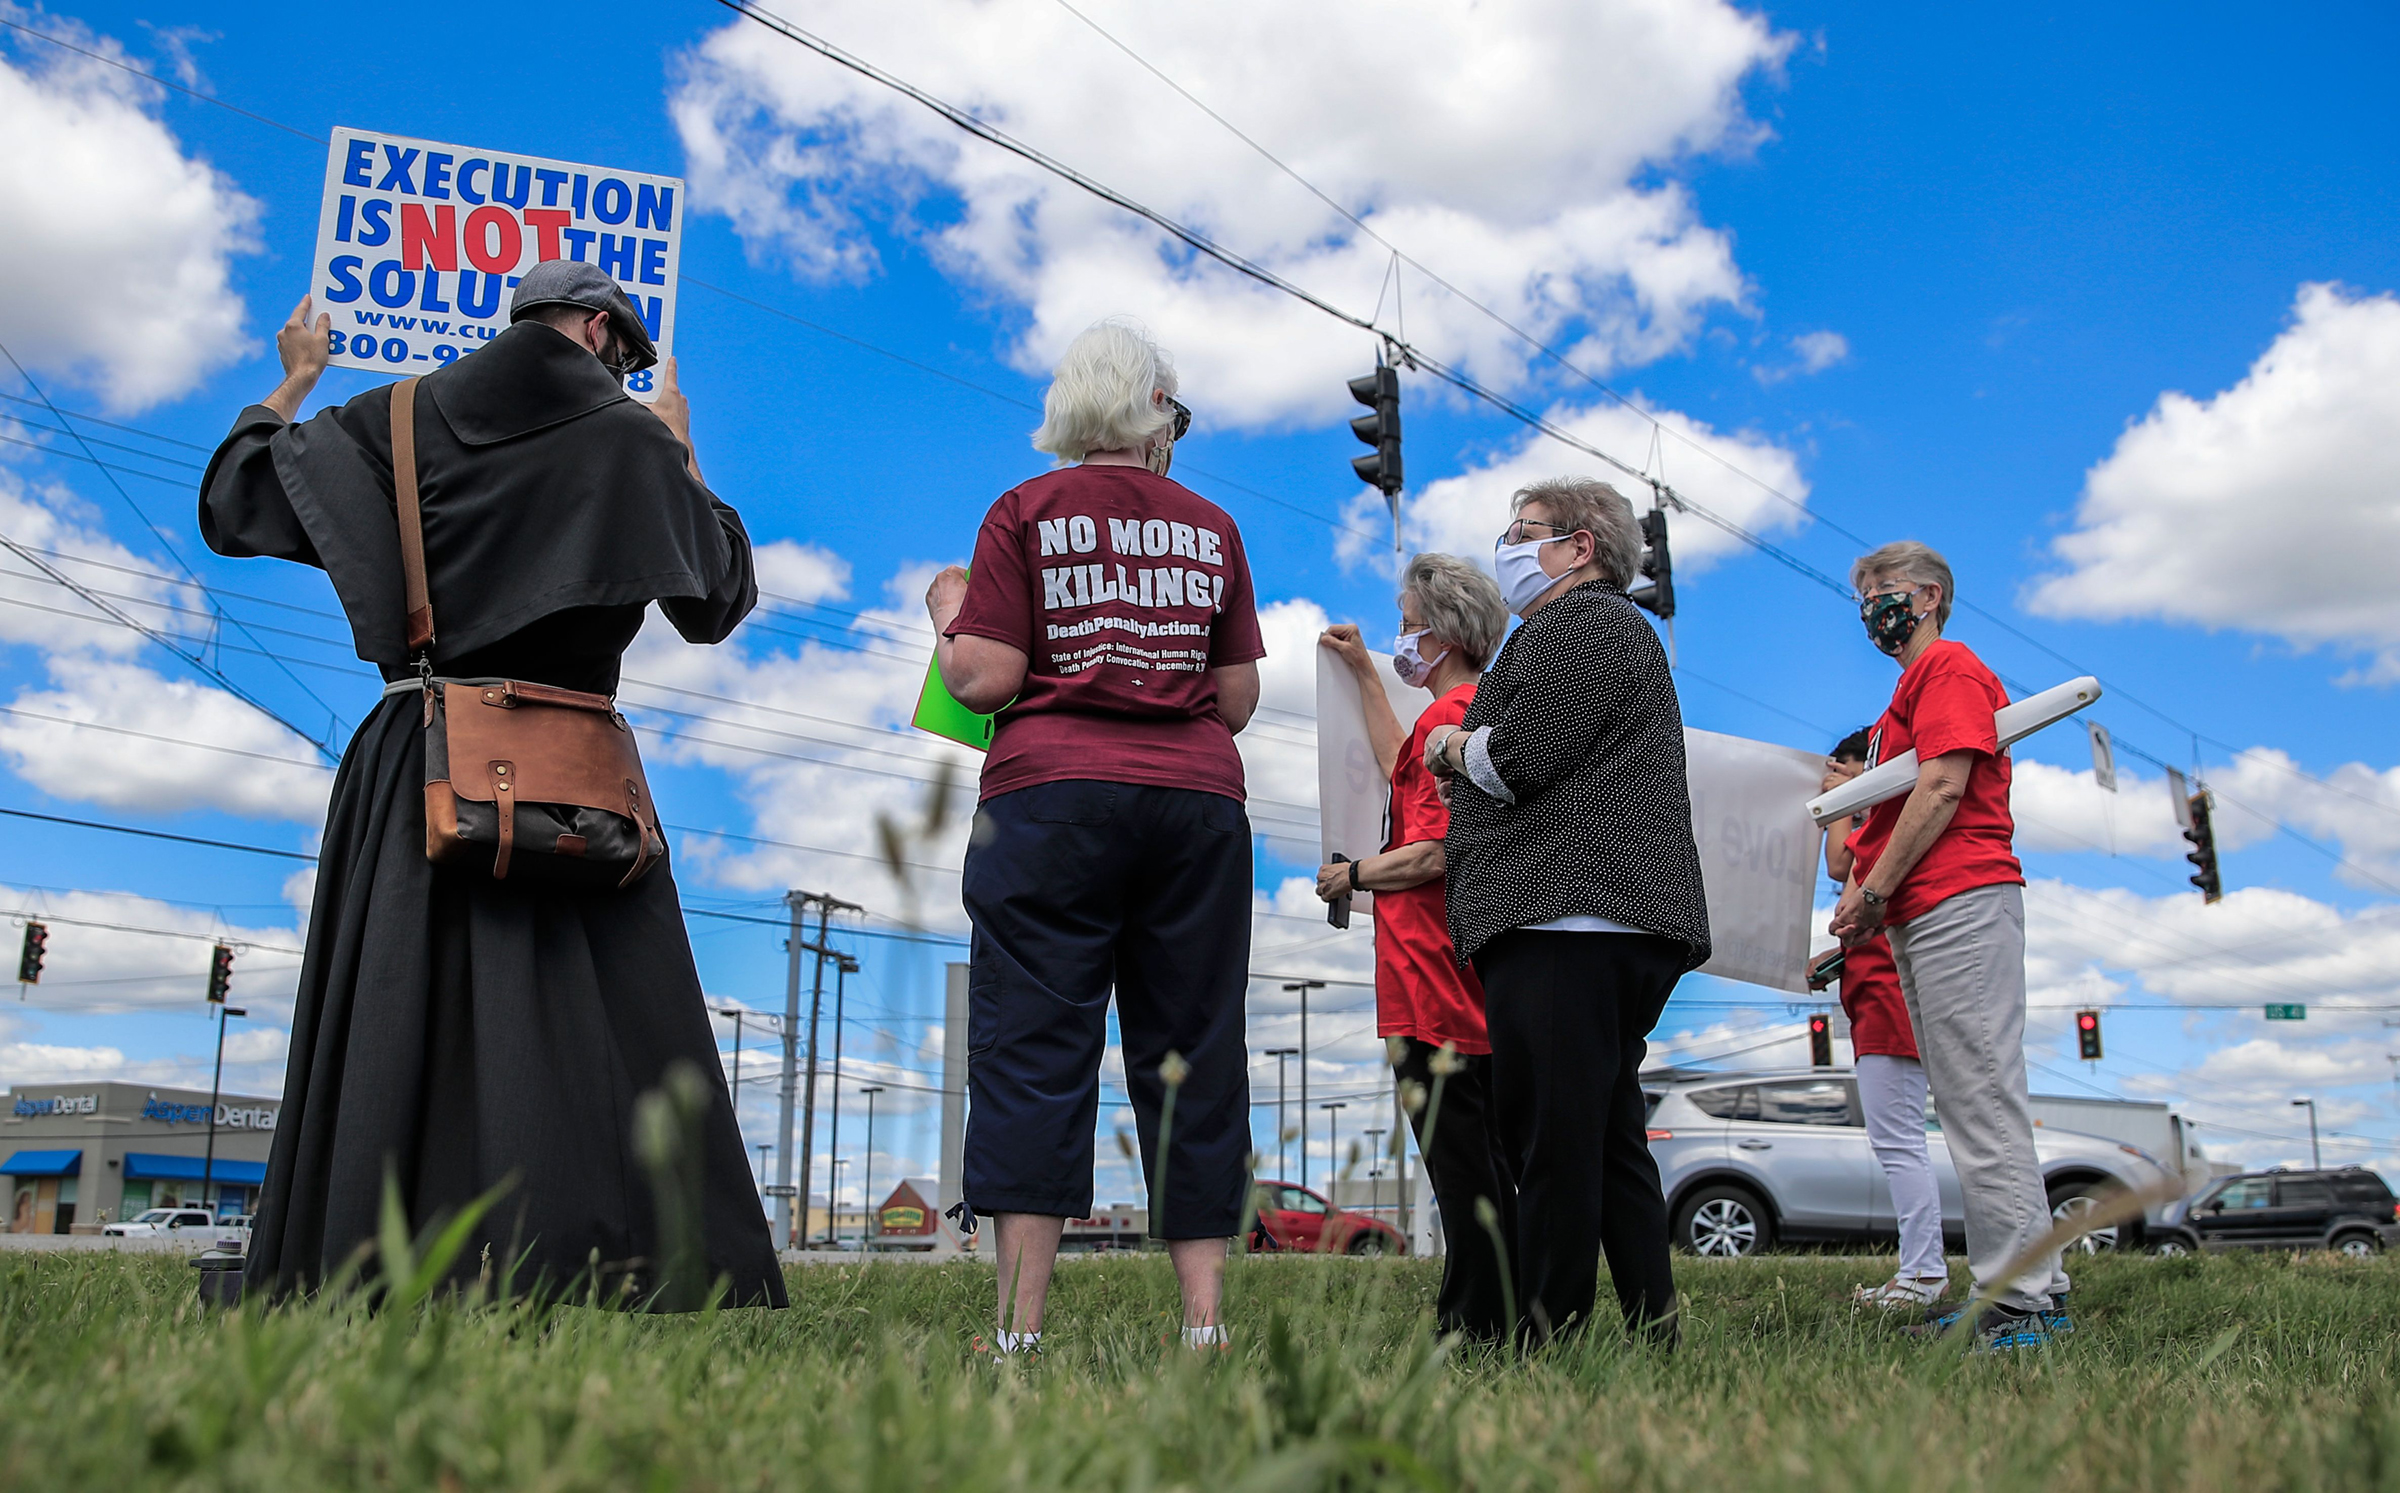 A protest in July against the resumption of federal executions near the U.S. penitentiary and execution chamber in Terre Haute, Ind. (Tannen Maury—EPA/Shutterstok)